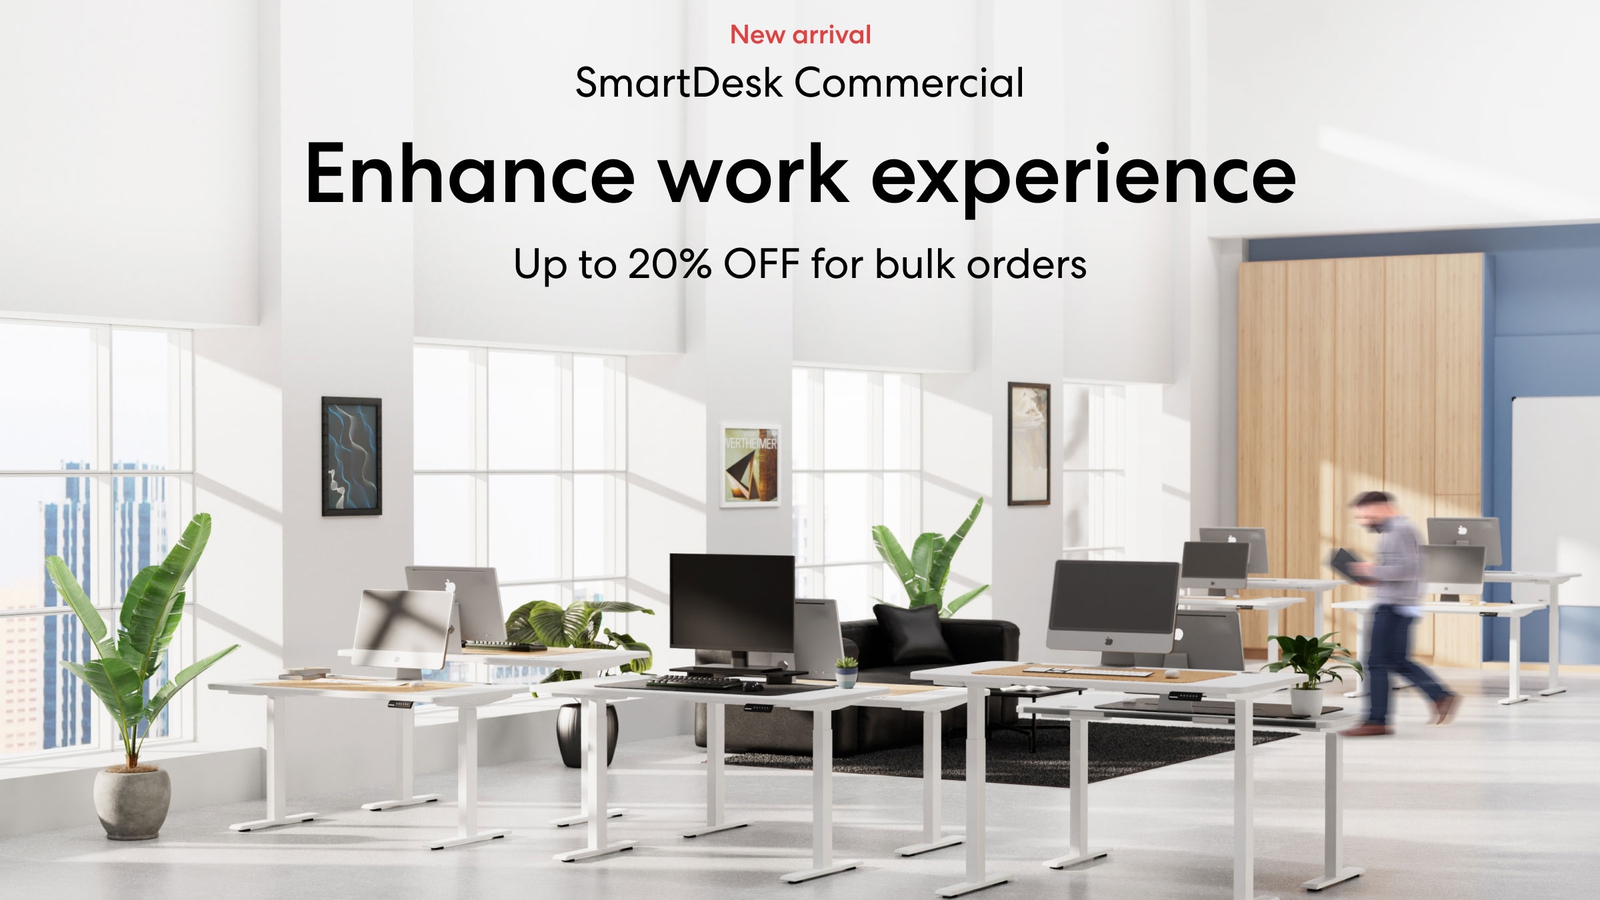 Introducing SmartDesk Commercial: Good for people, great for business